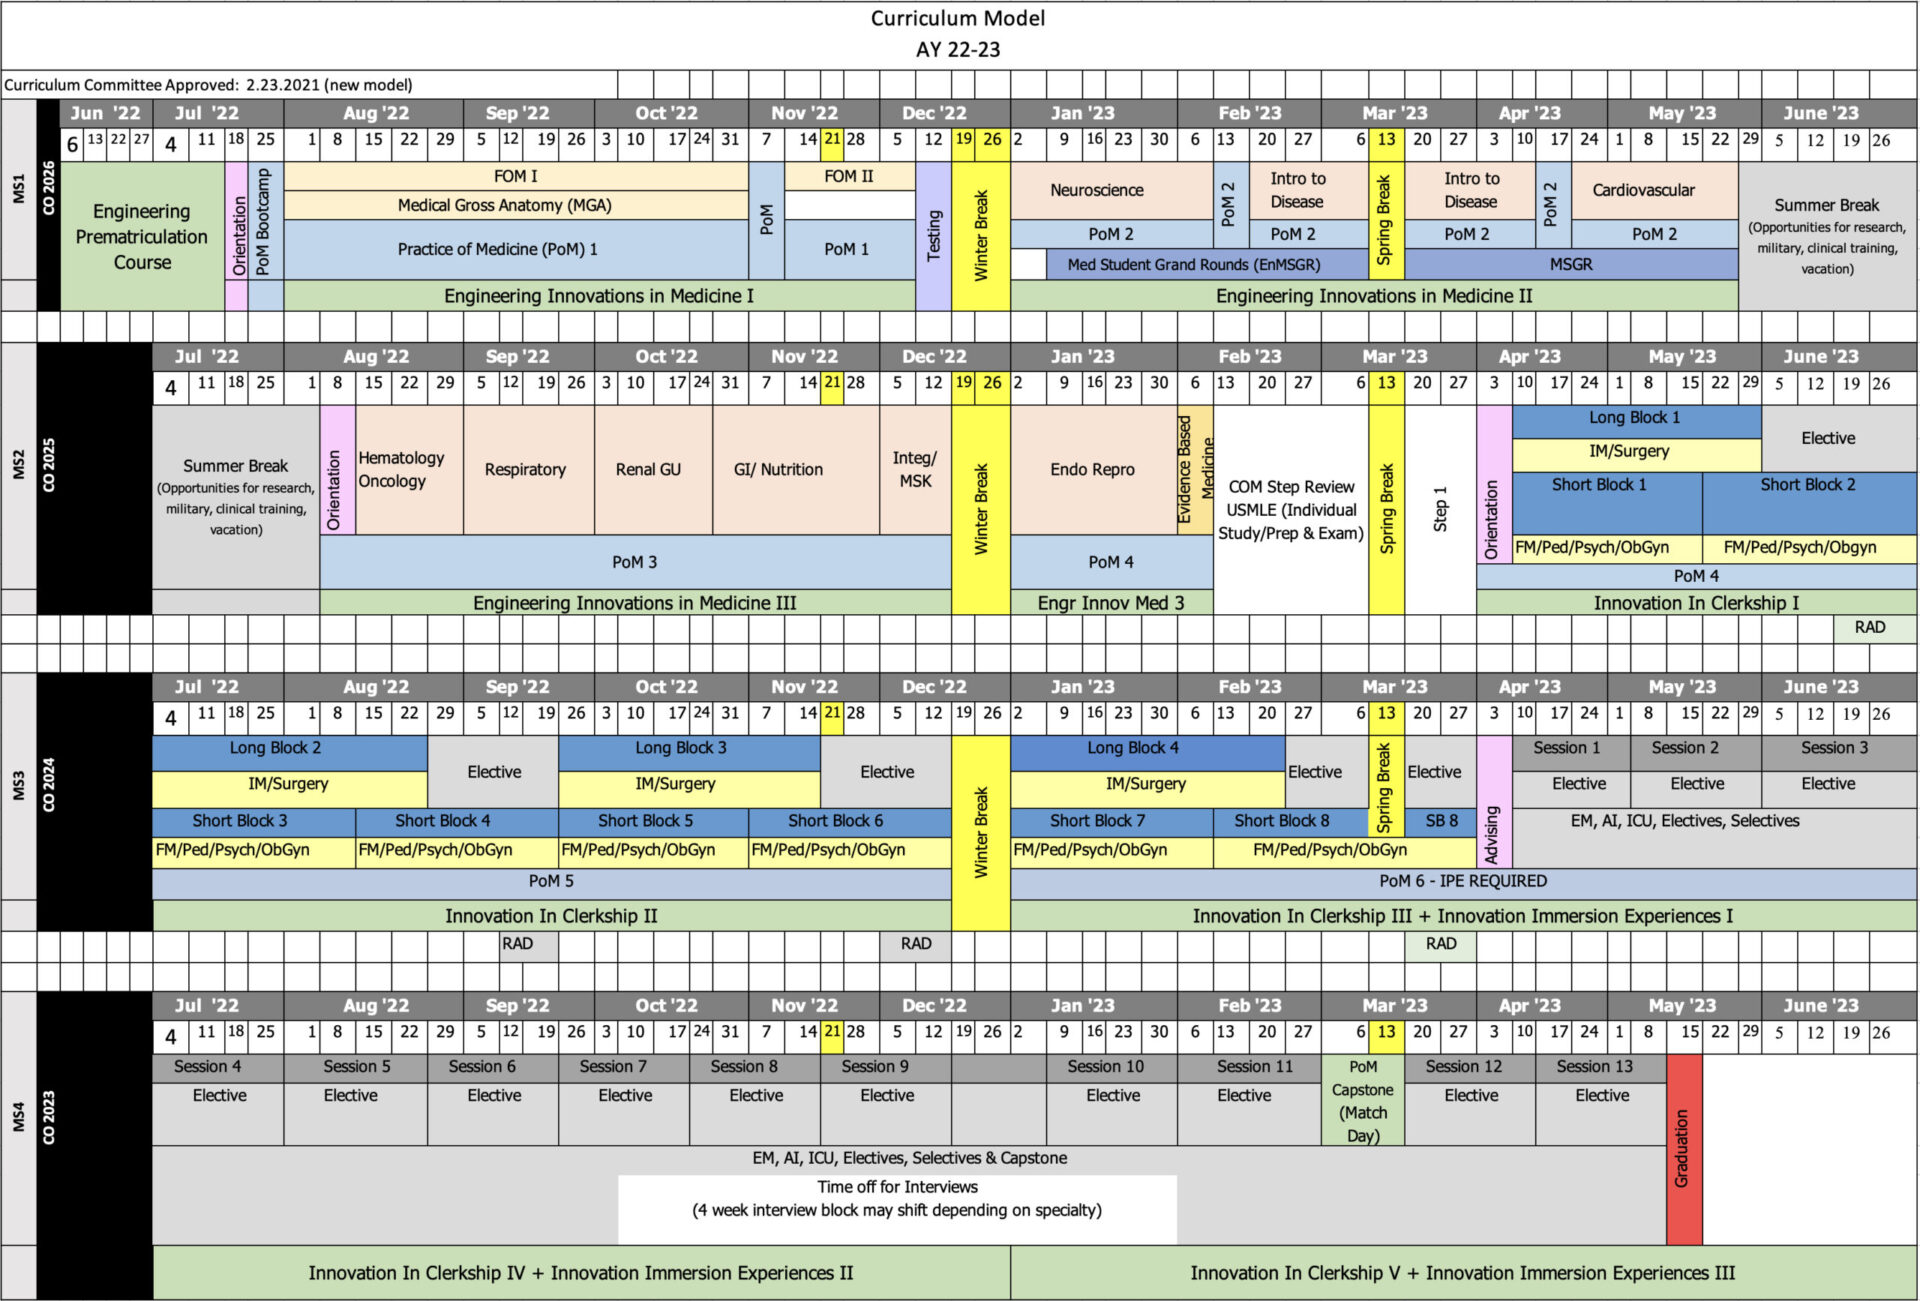 ENMED Curriculum Map